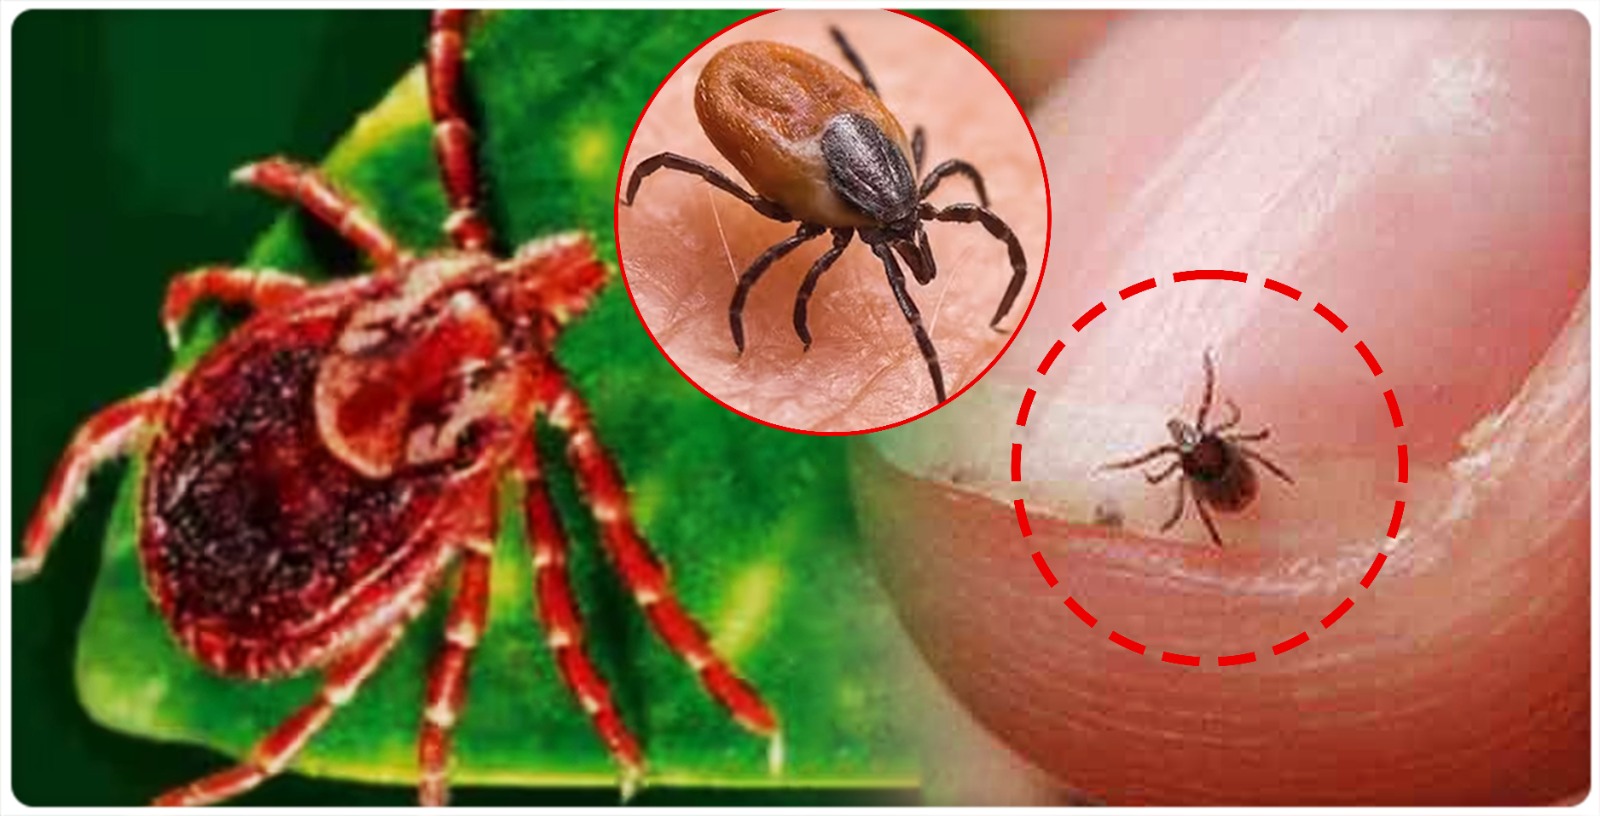 total-14-death-cases-registered-due-to-scrub-typhus-infection-in-india